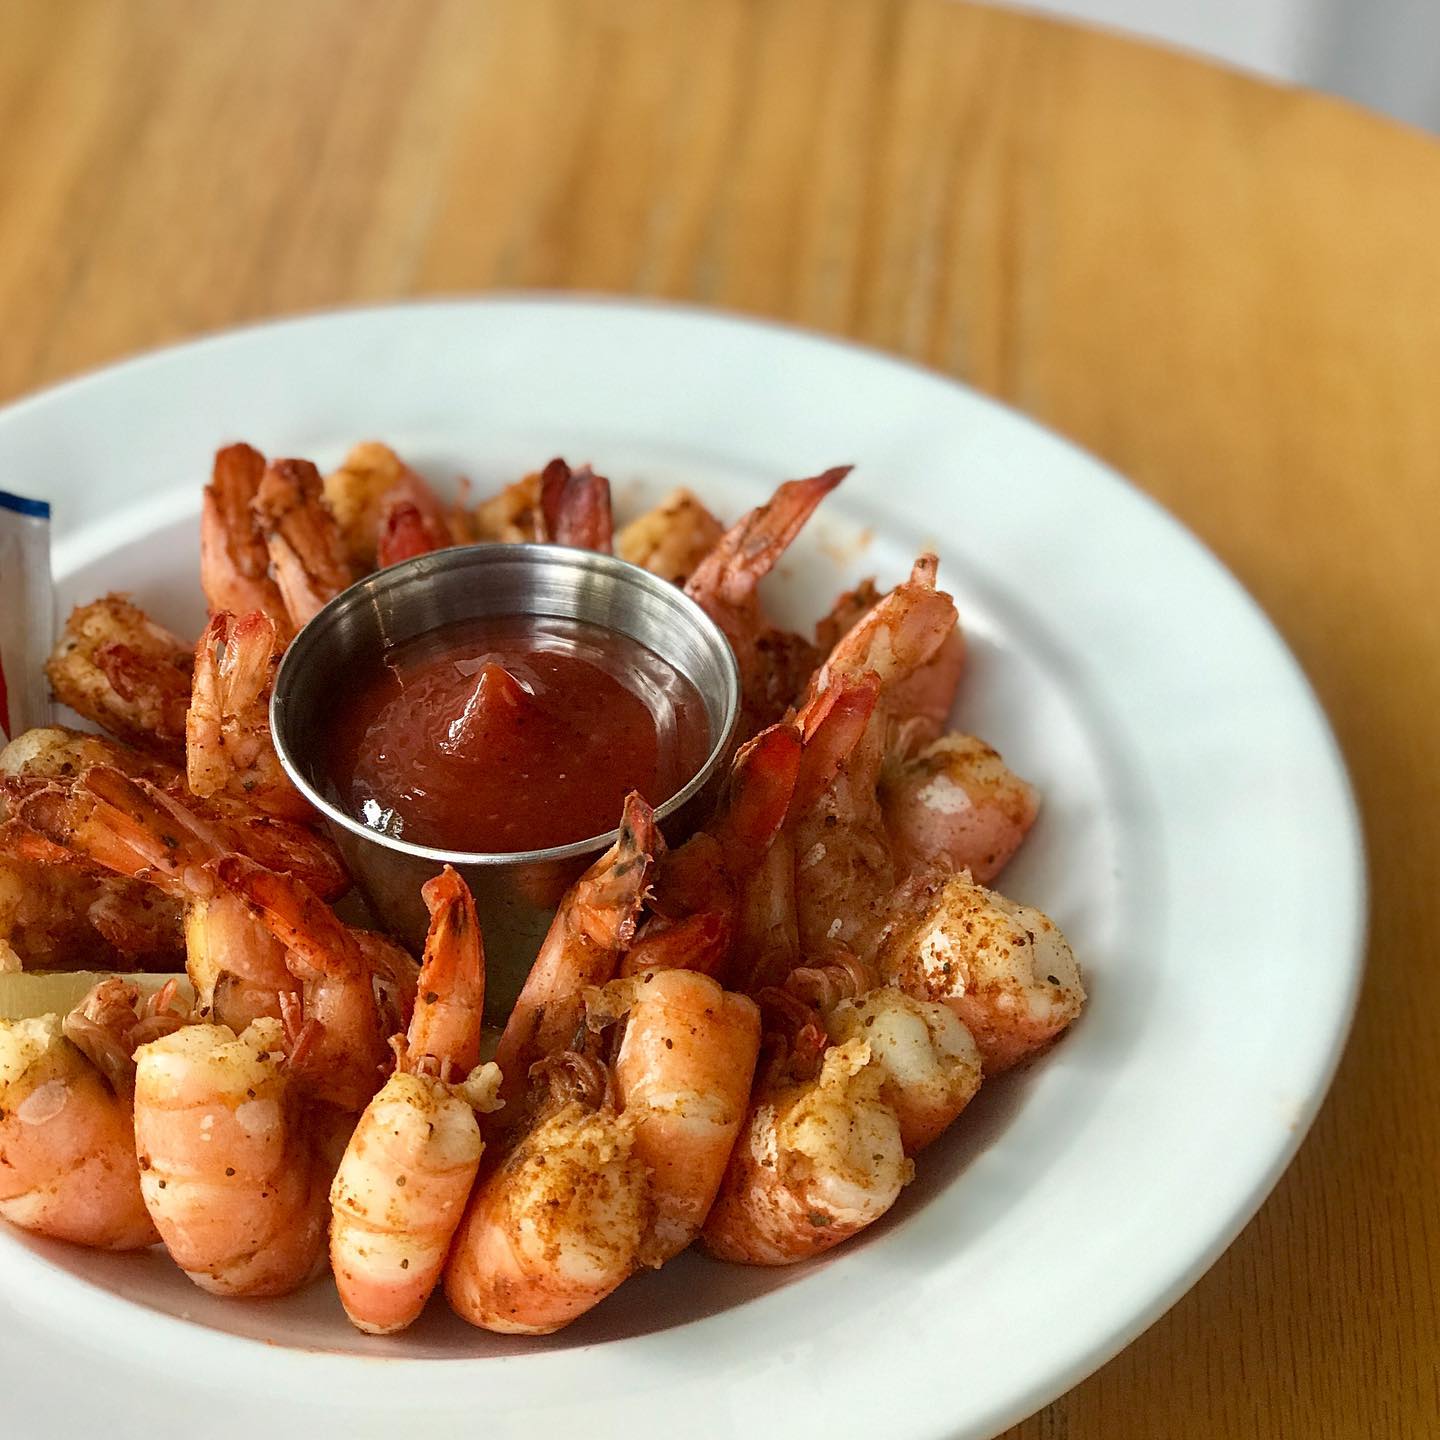 A platter of peel-and-eat shrimp with cocktail sauce from Hank's Oyster Bar. Photo by Instagram user @hanksoysterbar.